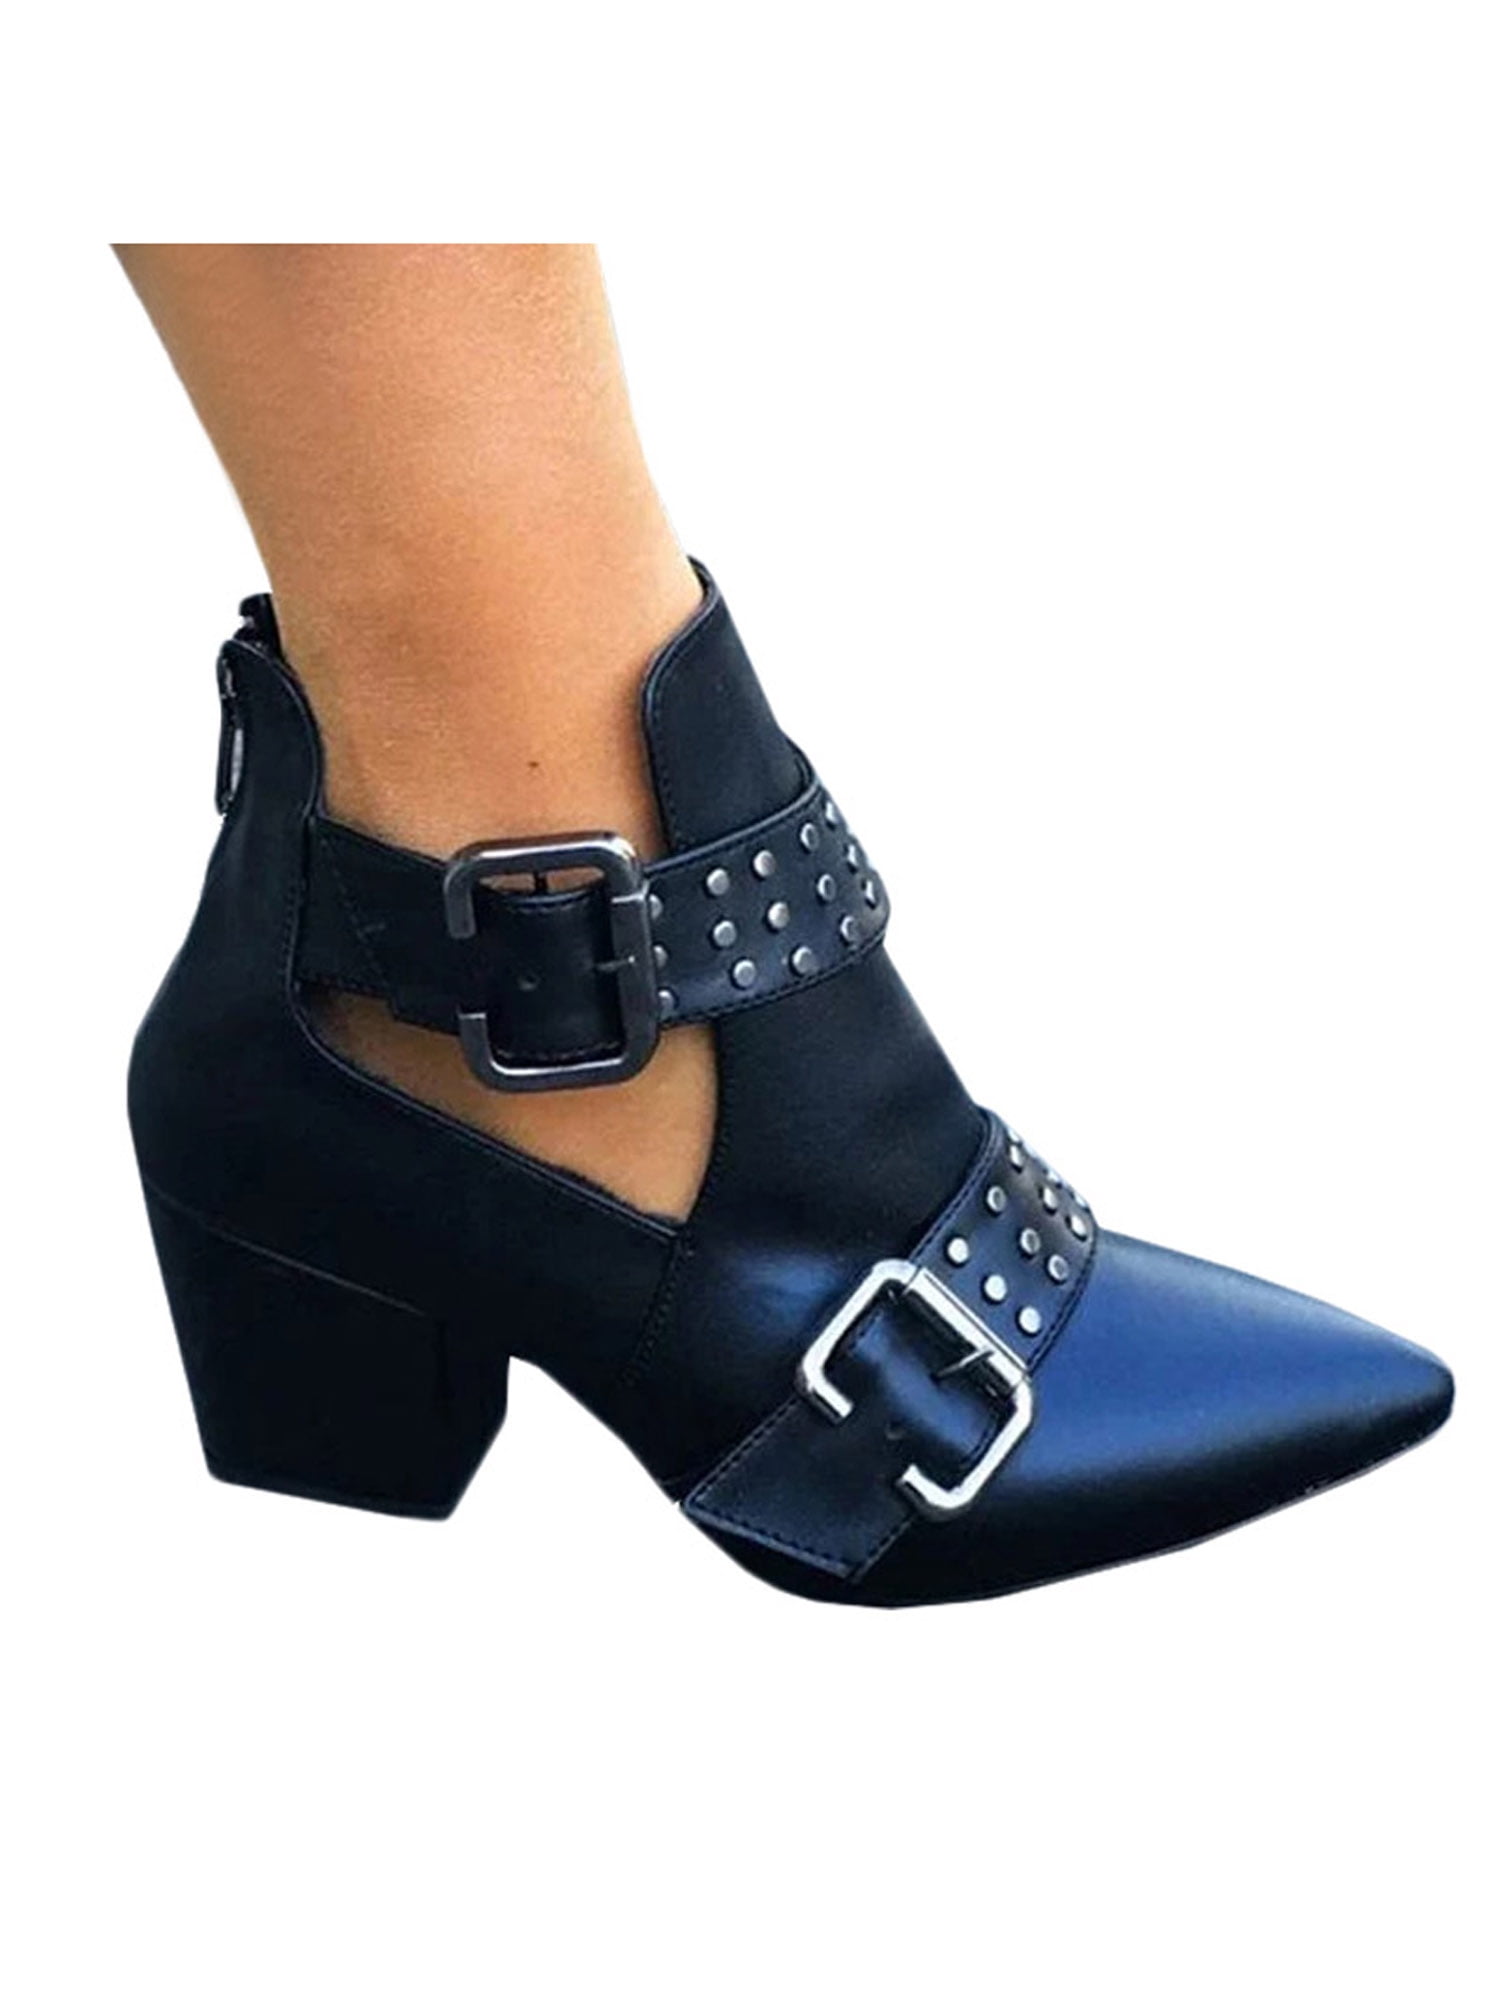 Details about   Women New Fashion Real Leather Round Toe Low Heels Buckle Strap Boots Two styles 